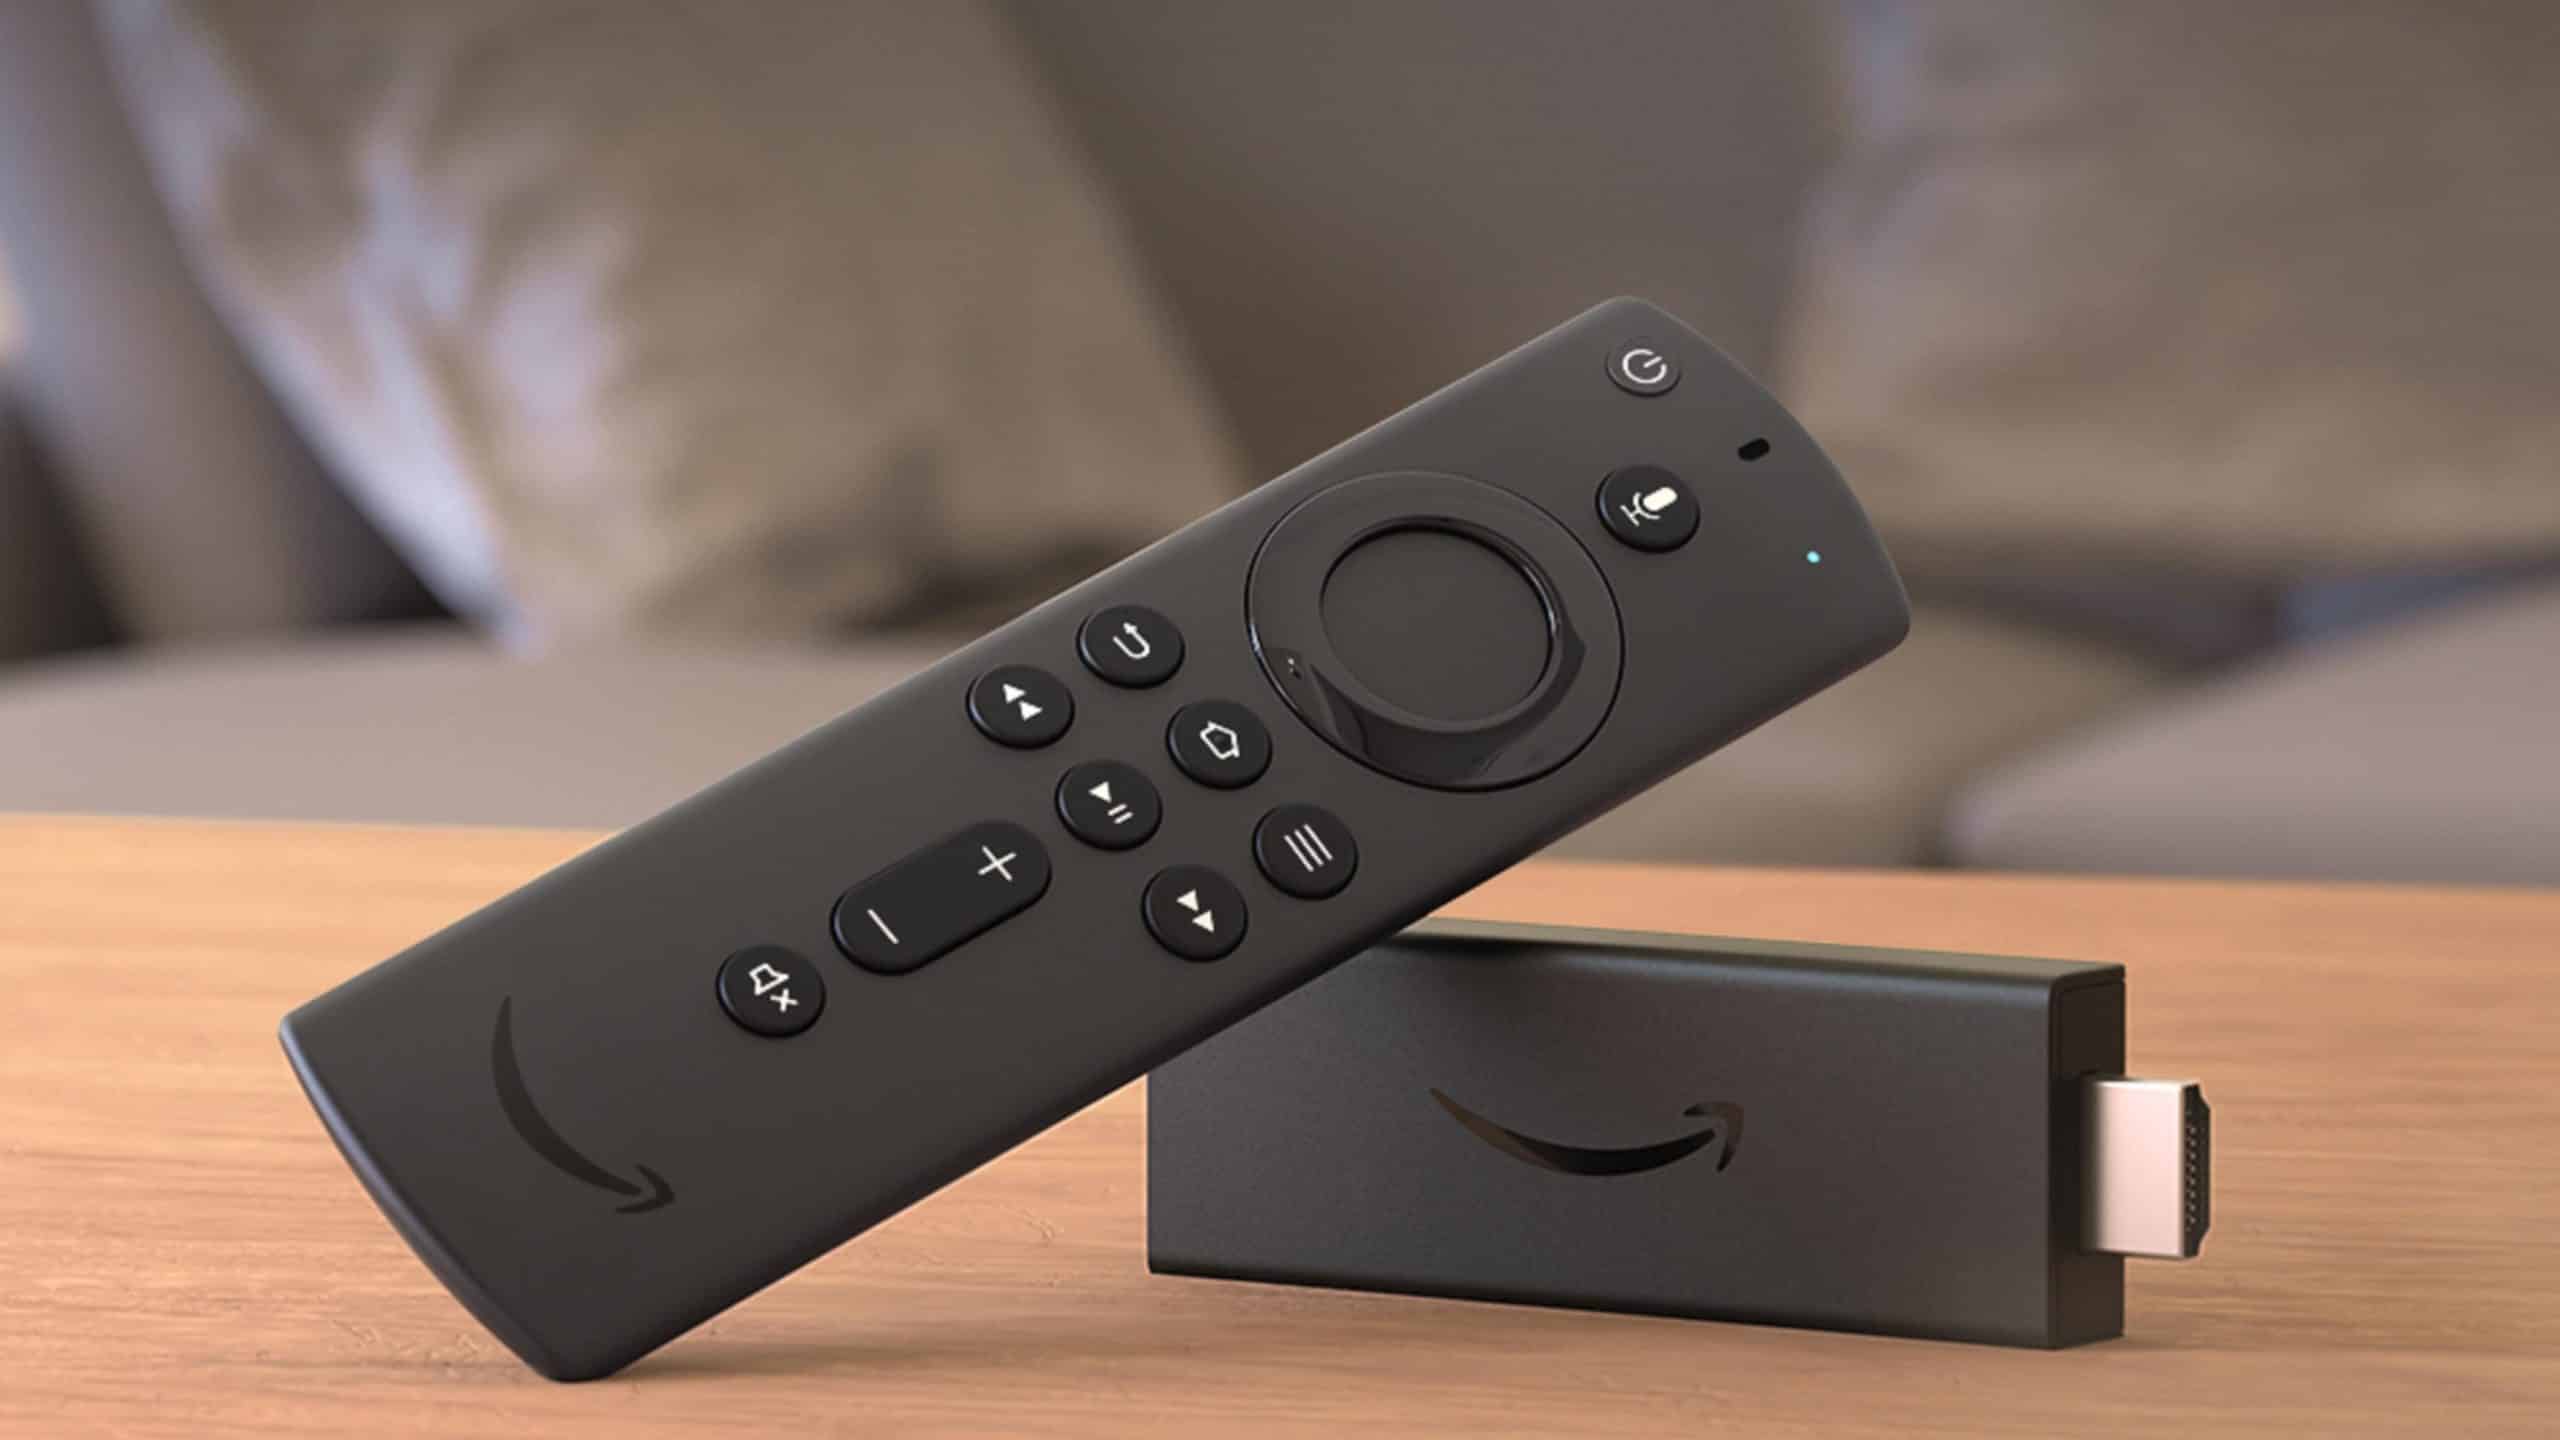 How To Use An Amazon Fire TV Stick Overseas?